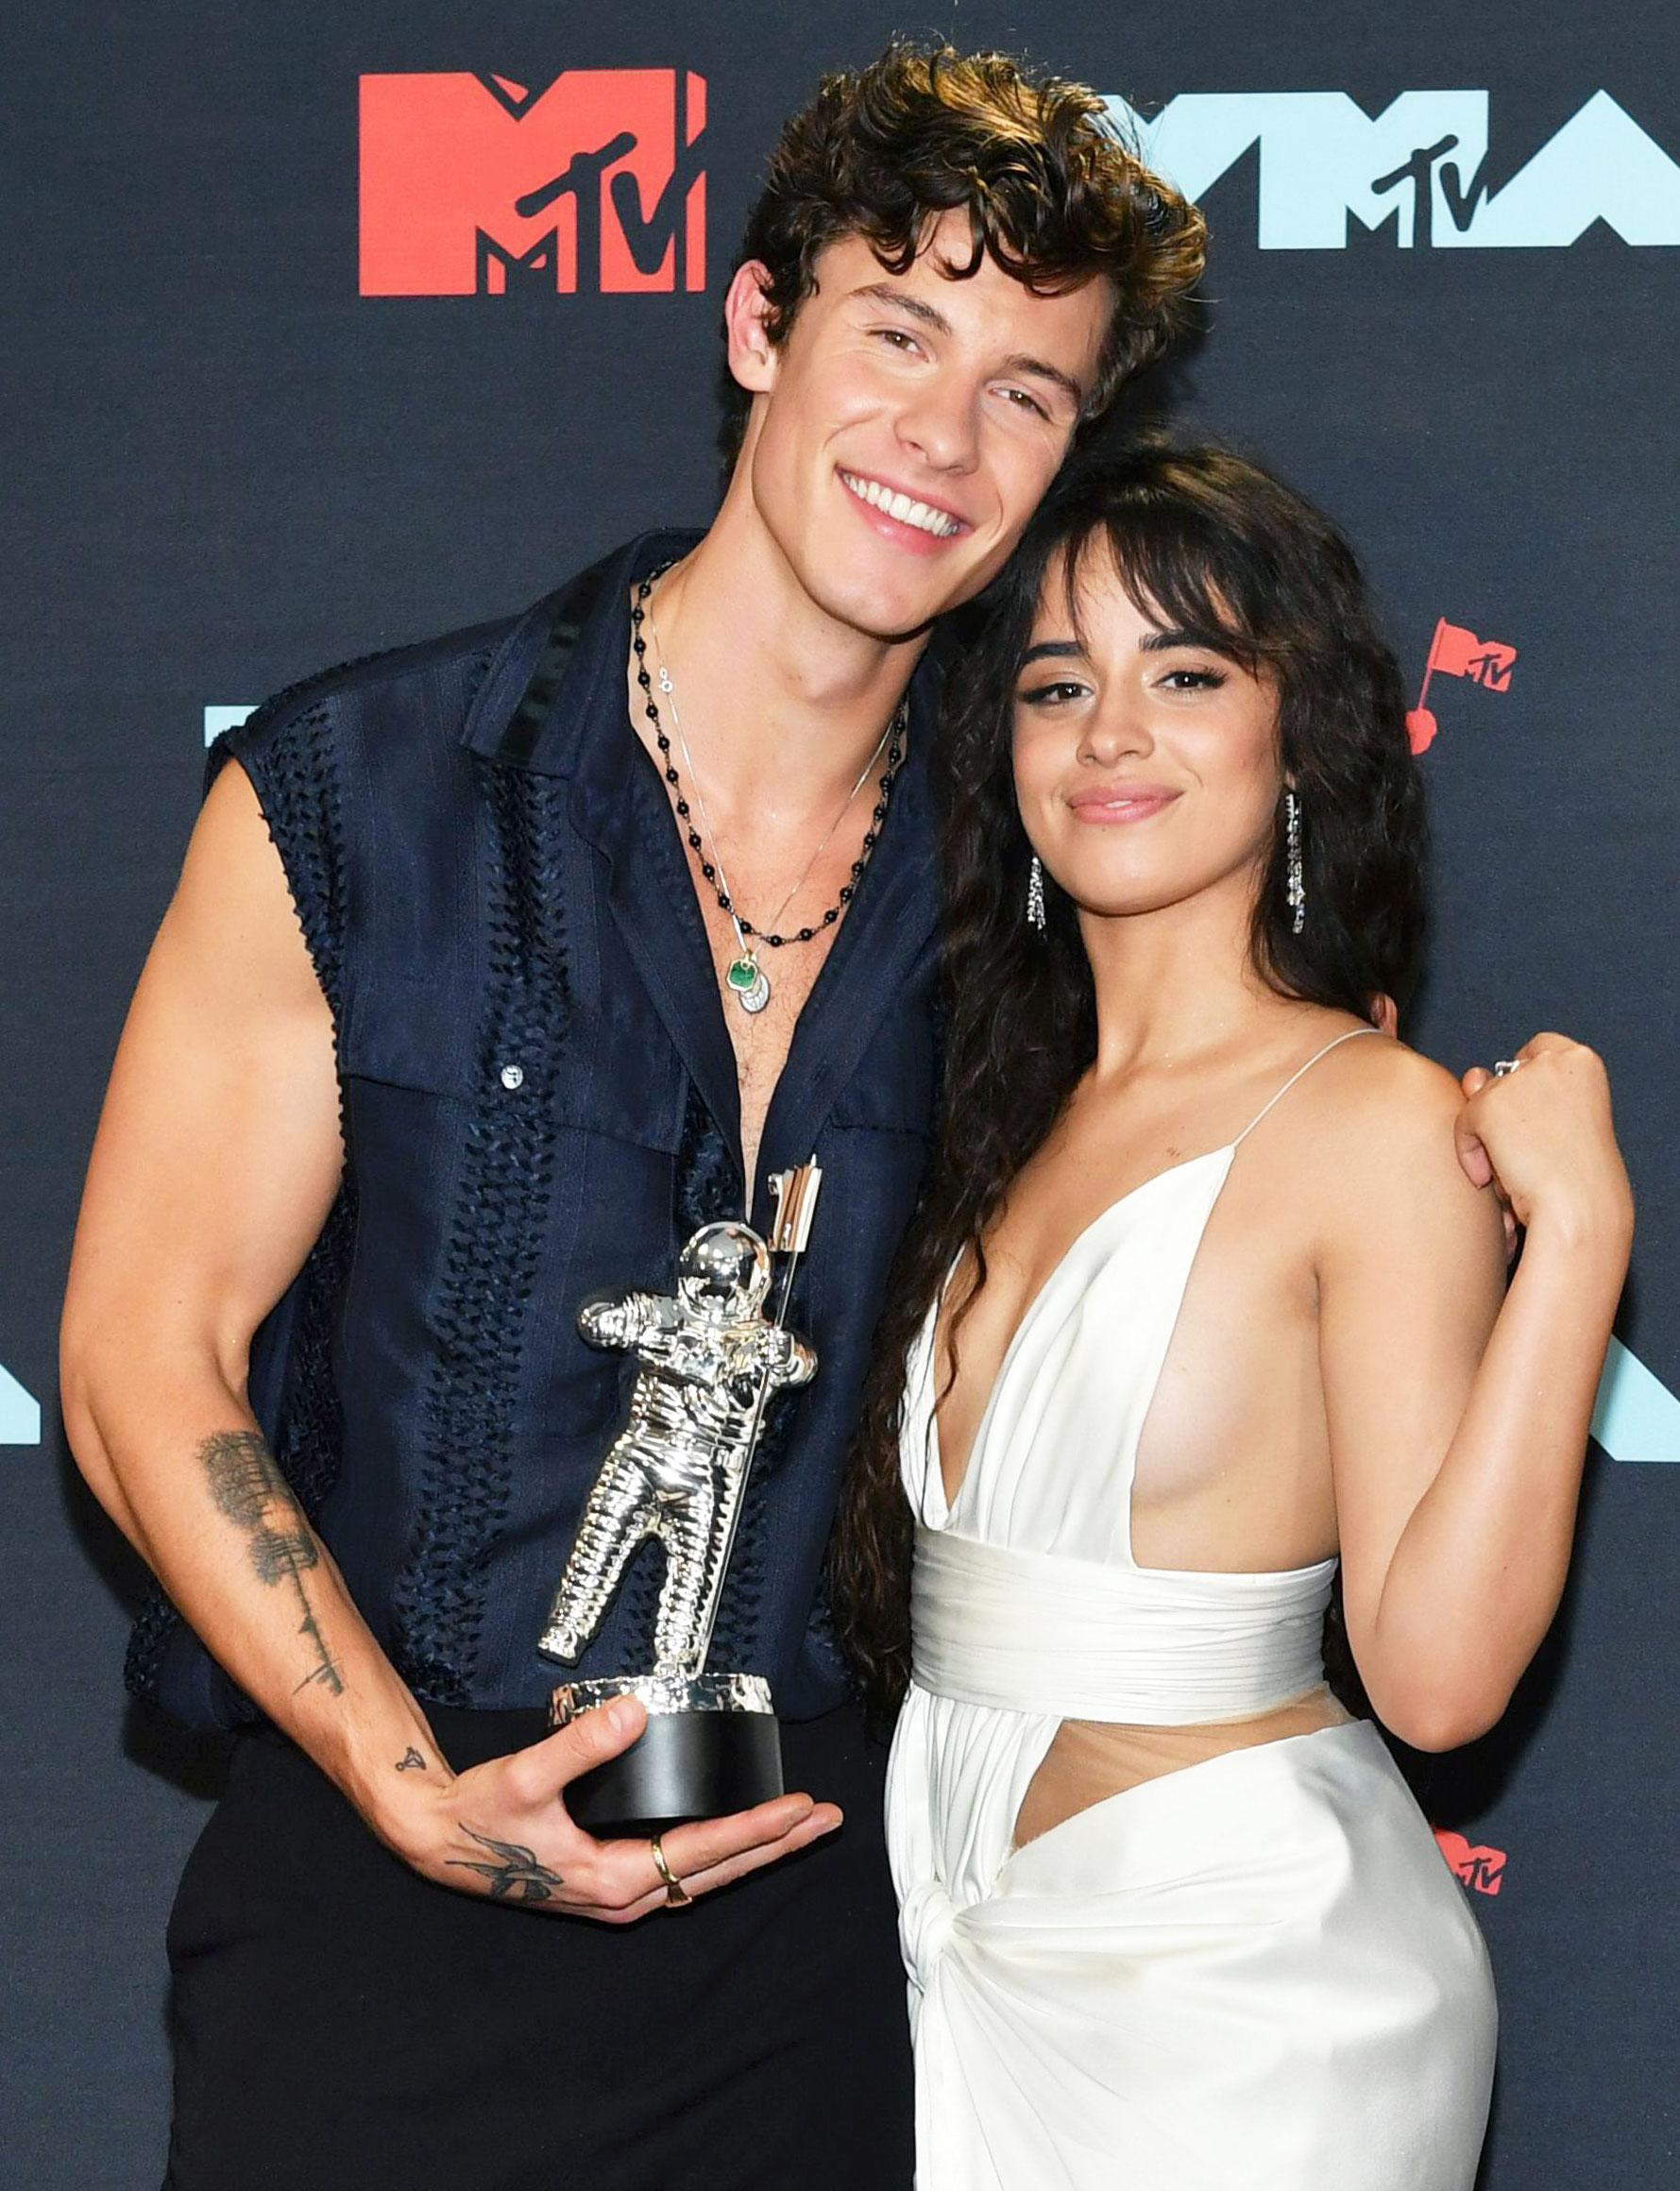 Camila Cabello and Shawn Mendes Get Tattoos Together